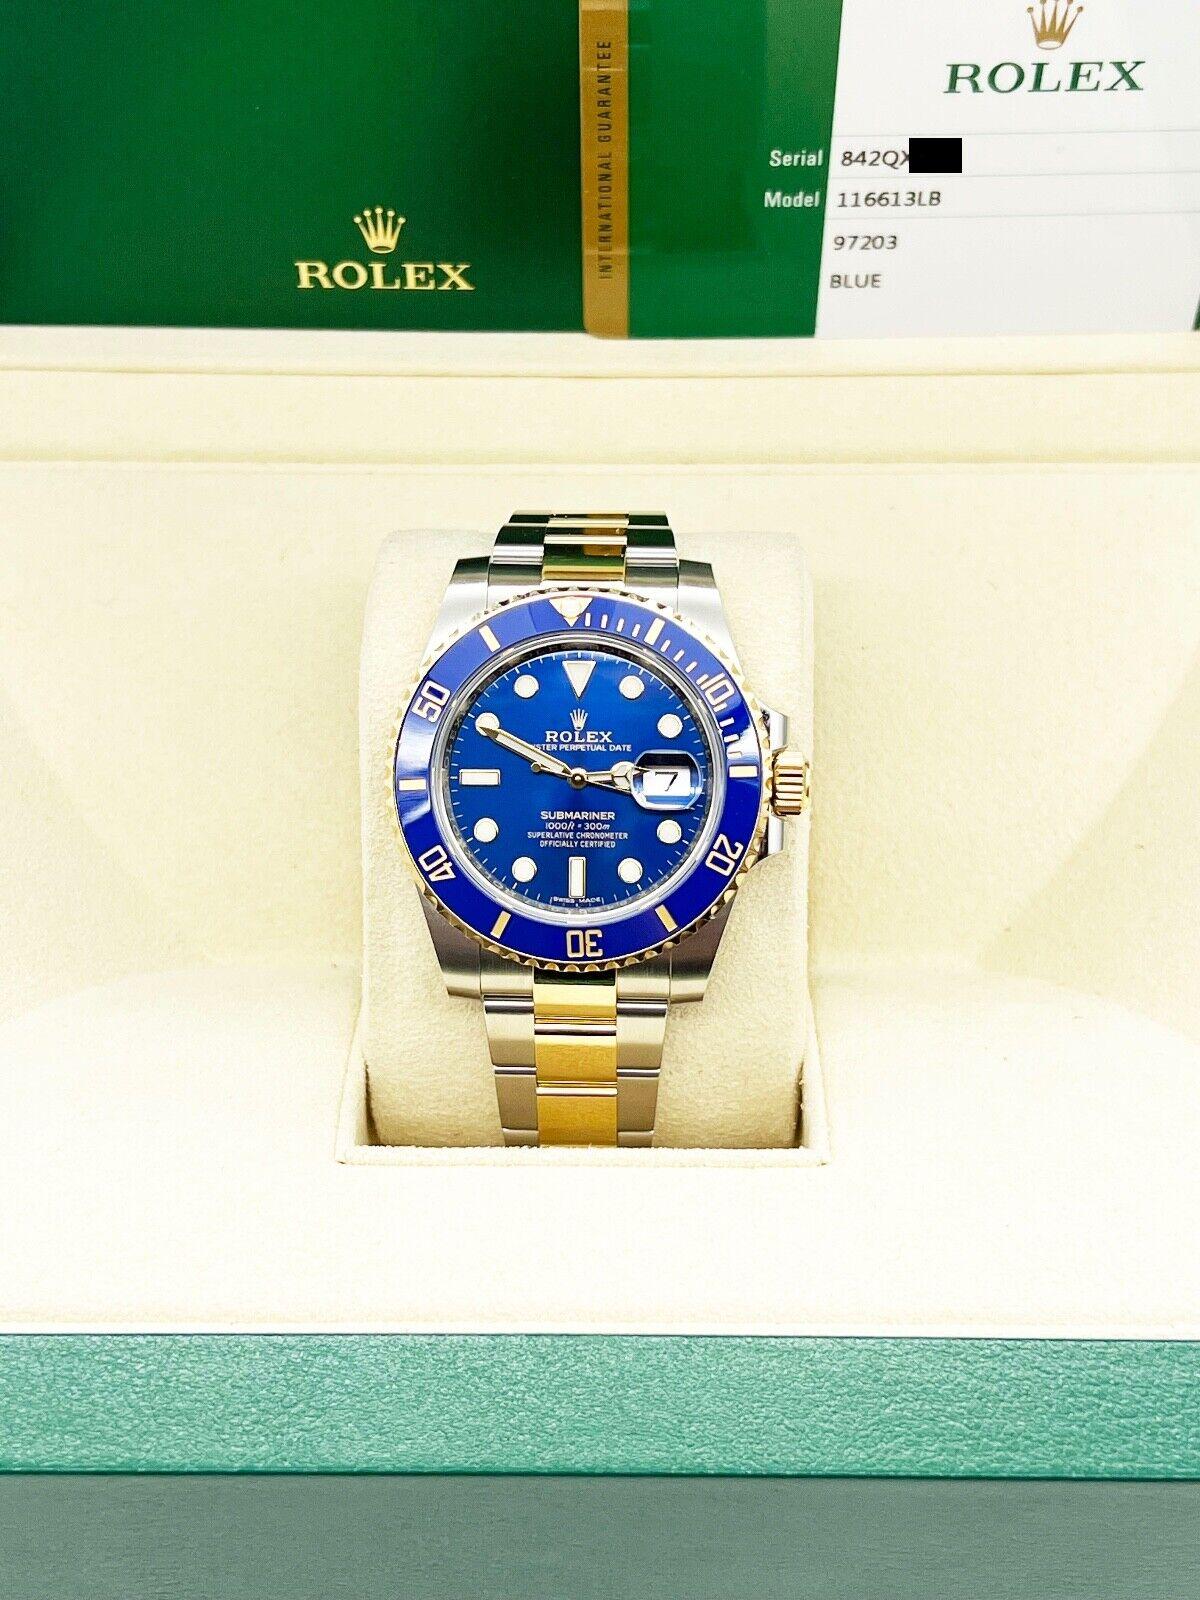 2020 Rolex Submariner 116613 Blue Ceramic 18K Yellow Gold Stainless Box Paper For Sale 4